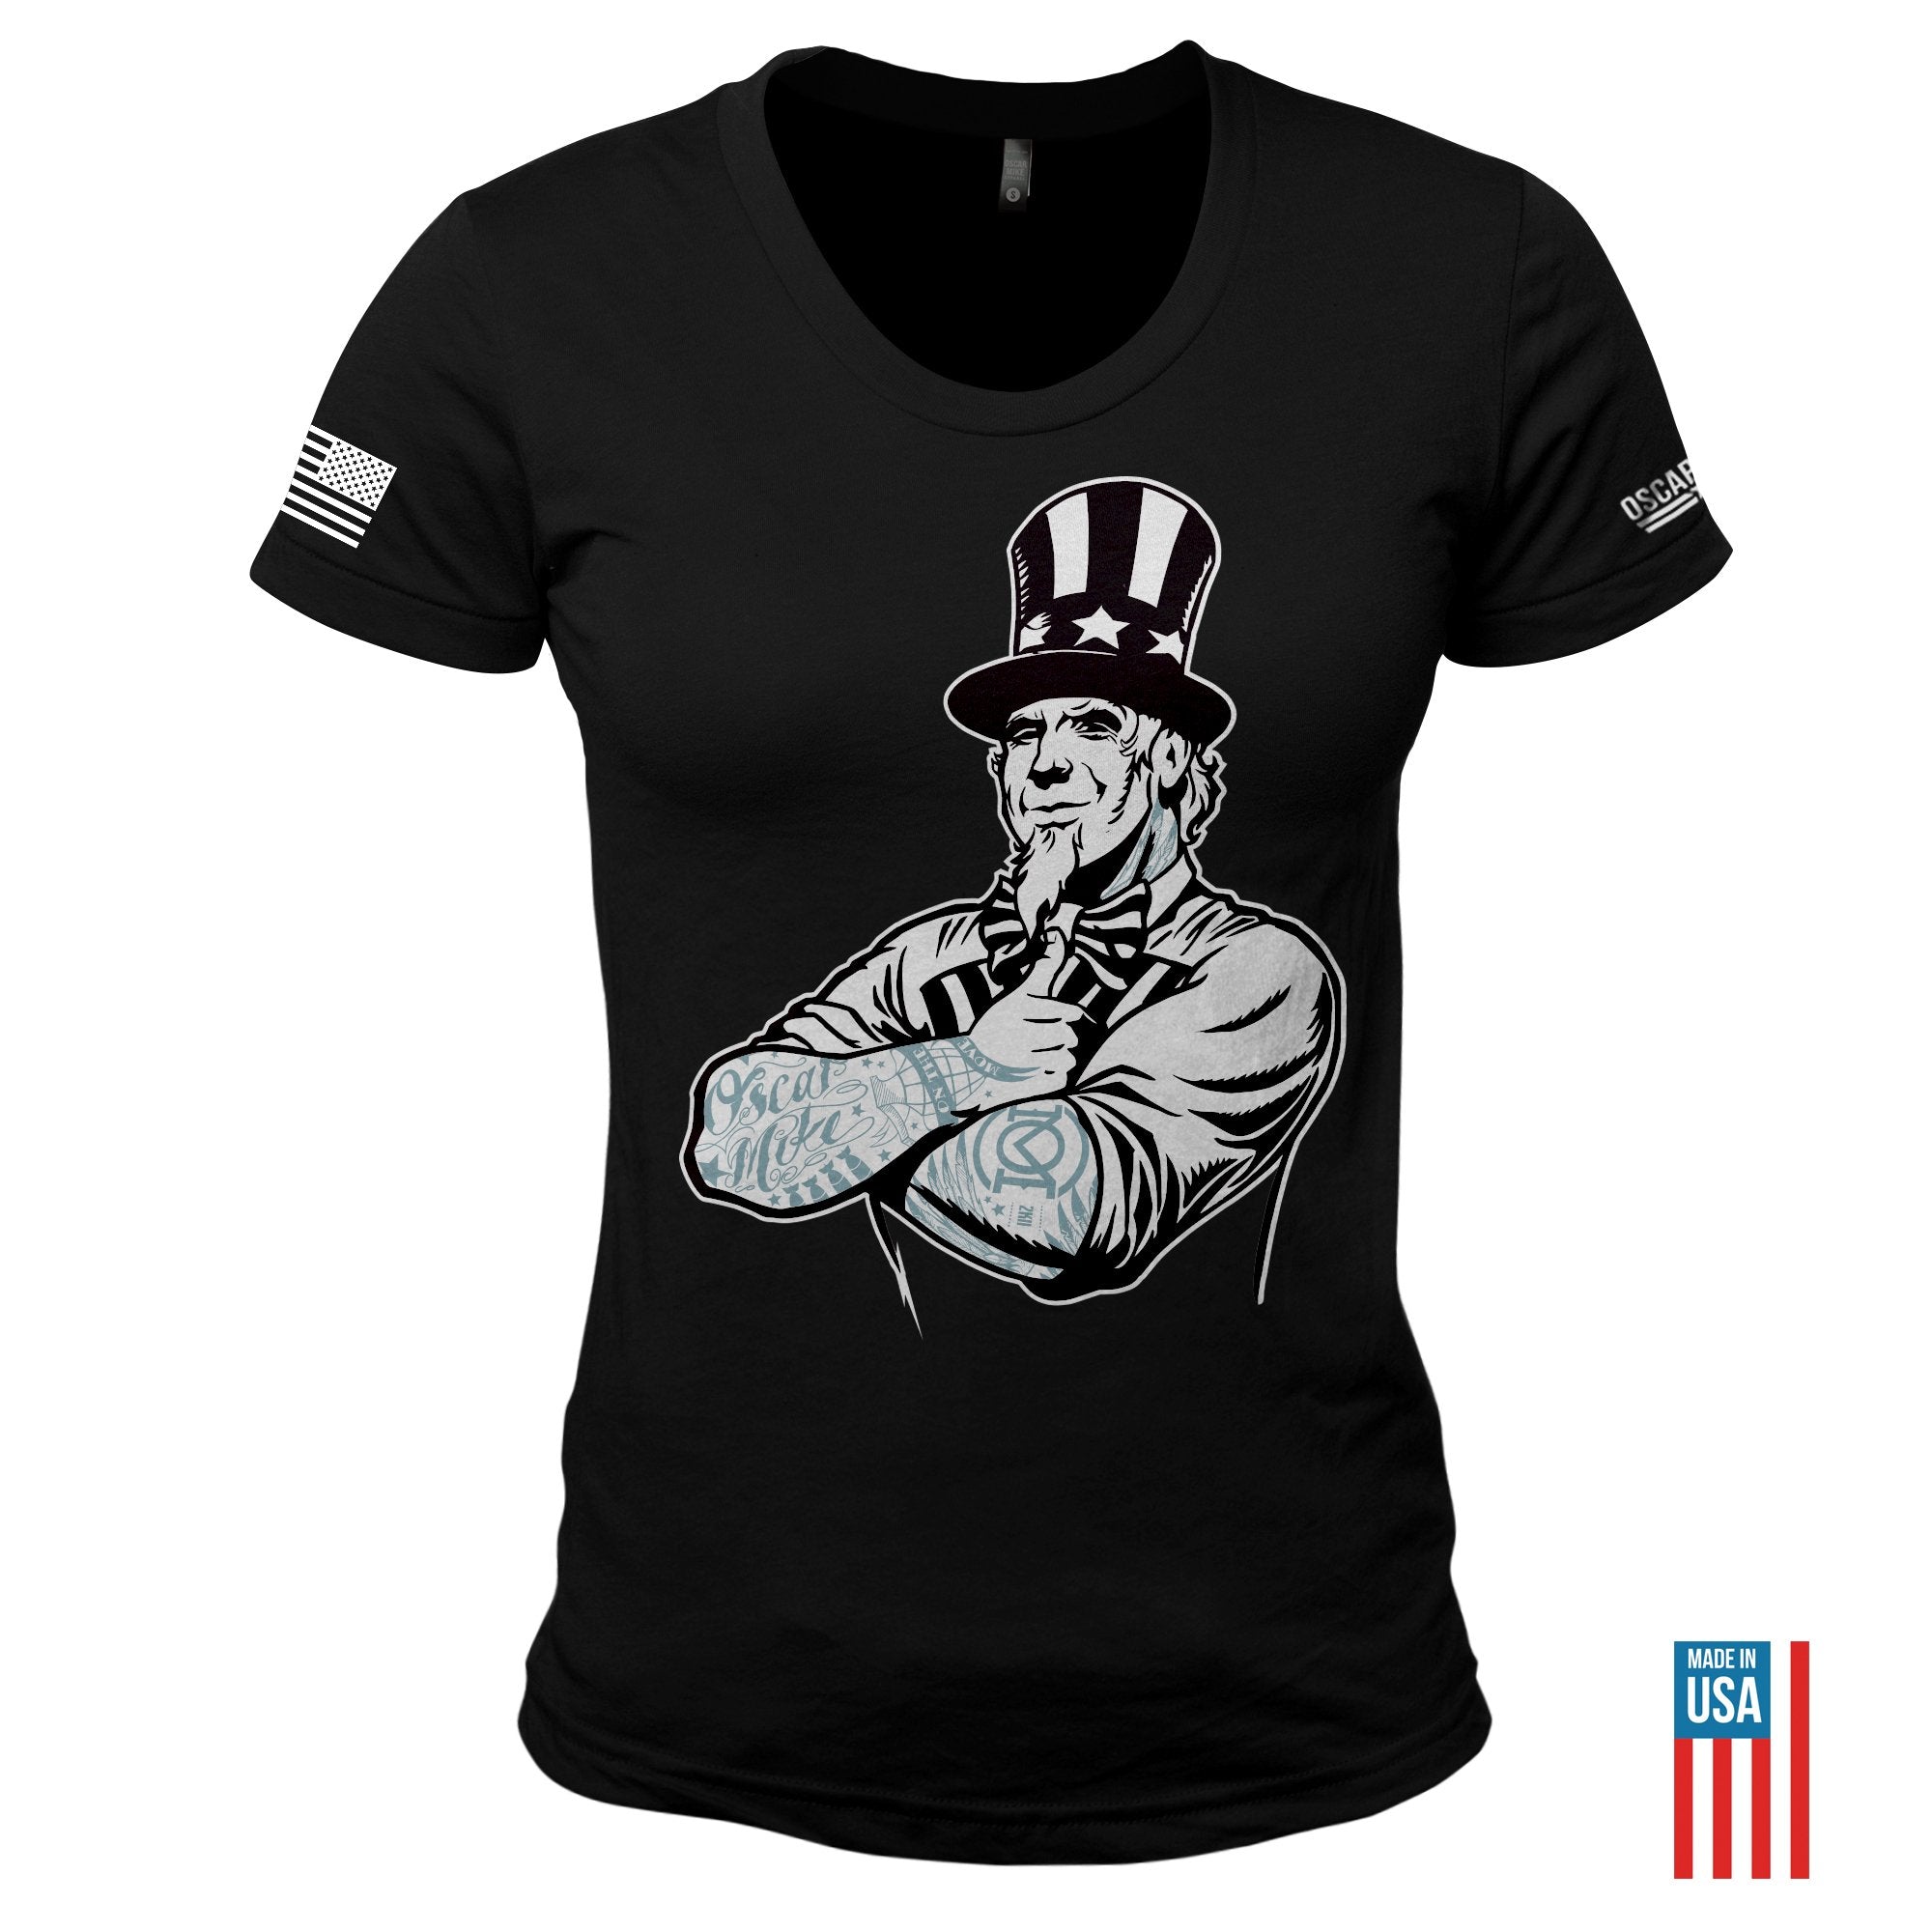 Women's Uncle Sam T-Shirt from Oscar Mike Apparel